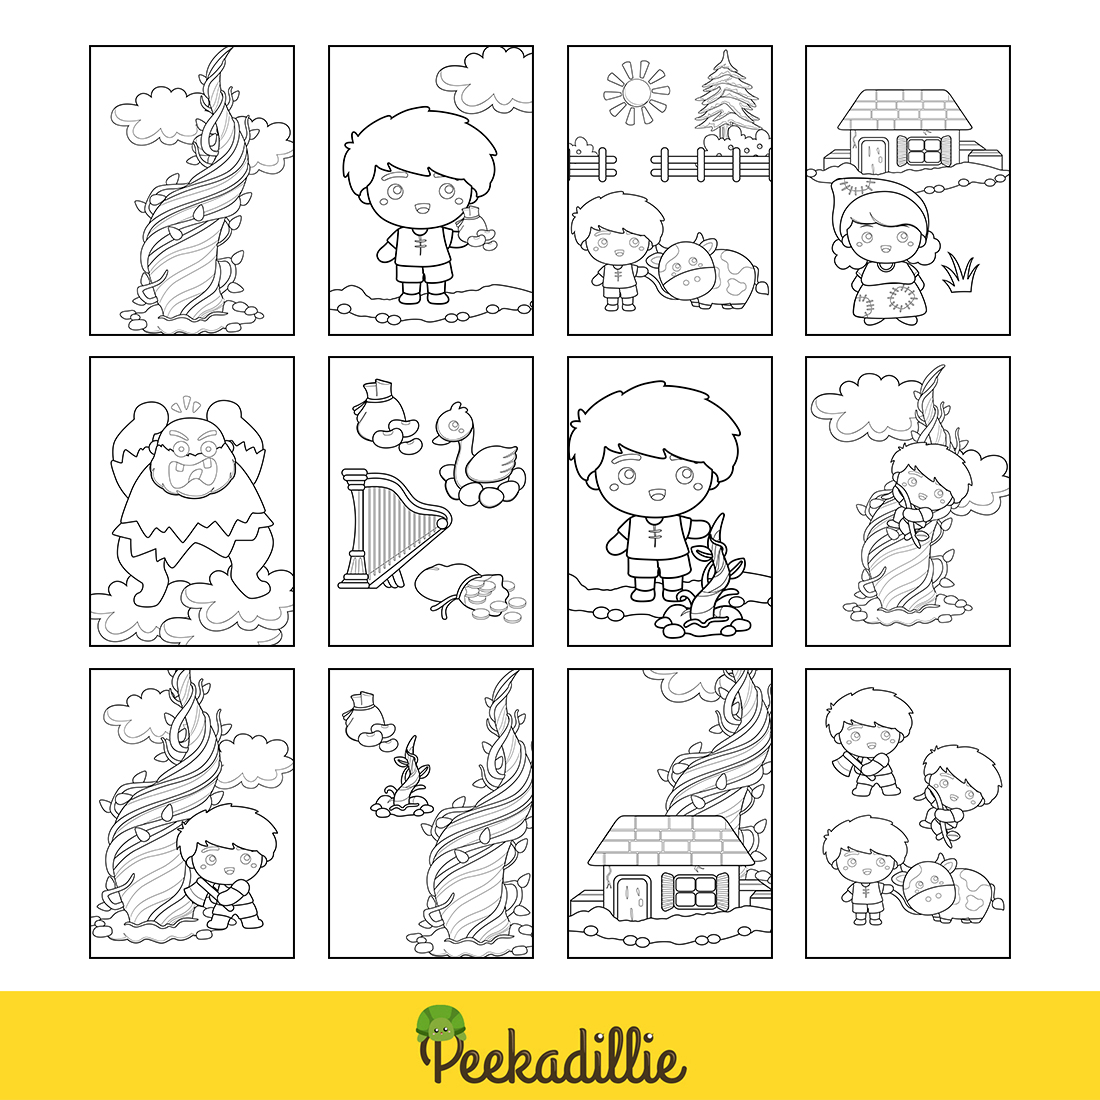 Jack and the Beanstalk Classic Kids Bedtime Story Coloring Pages Activity For Kids And Adult preview image.